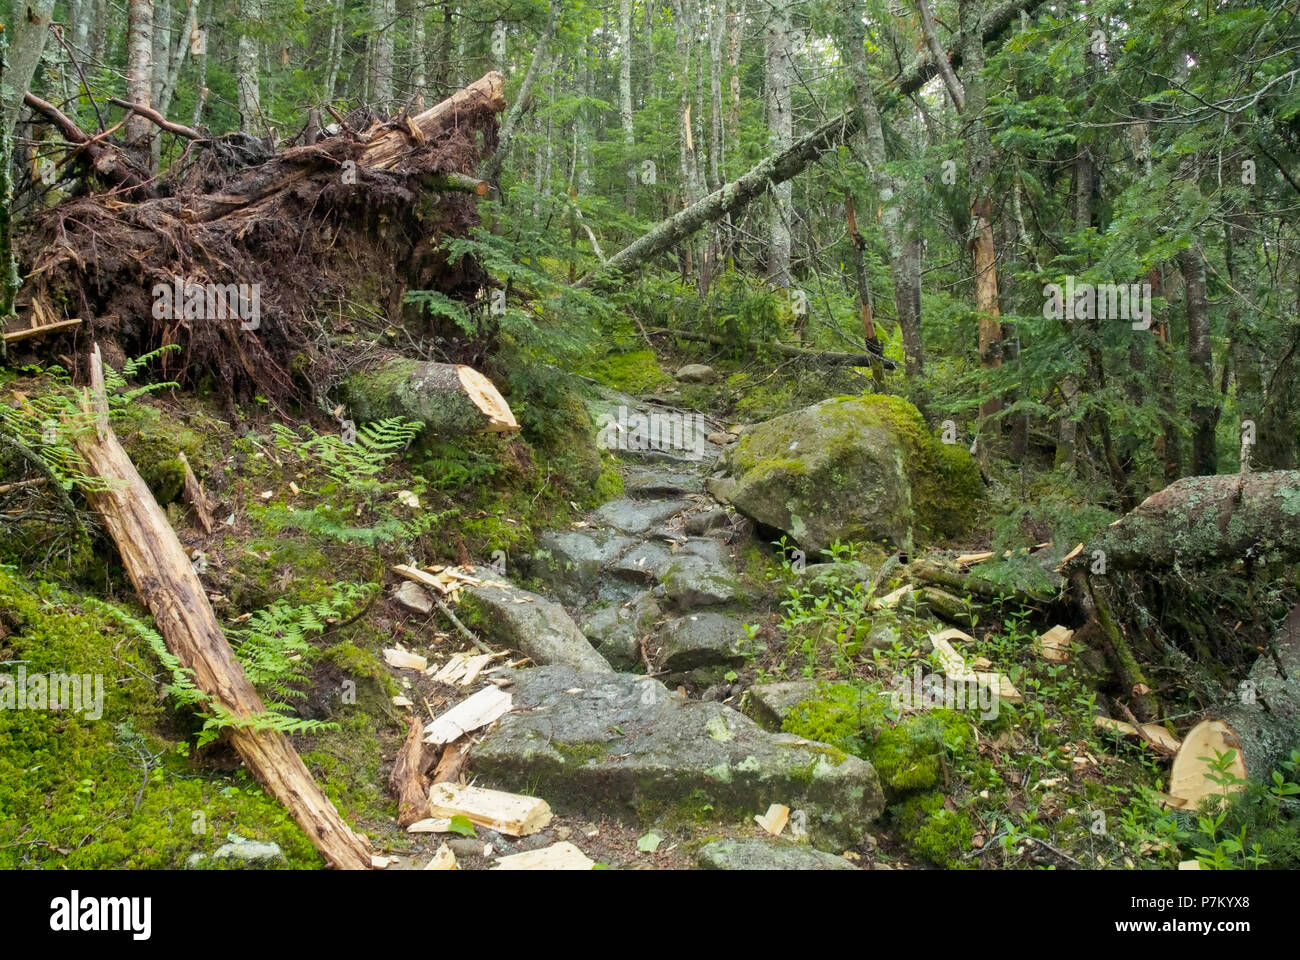 A freshly cut blowdown that has been removed with the use of an axe along the Greenleaf Trail in the White Mountains of New Hampshire. Stock Photo